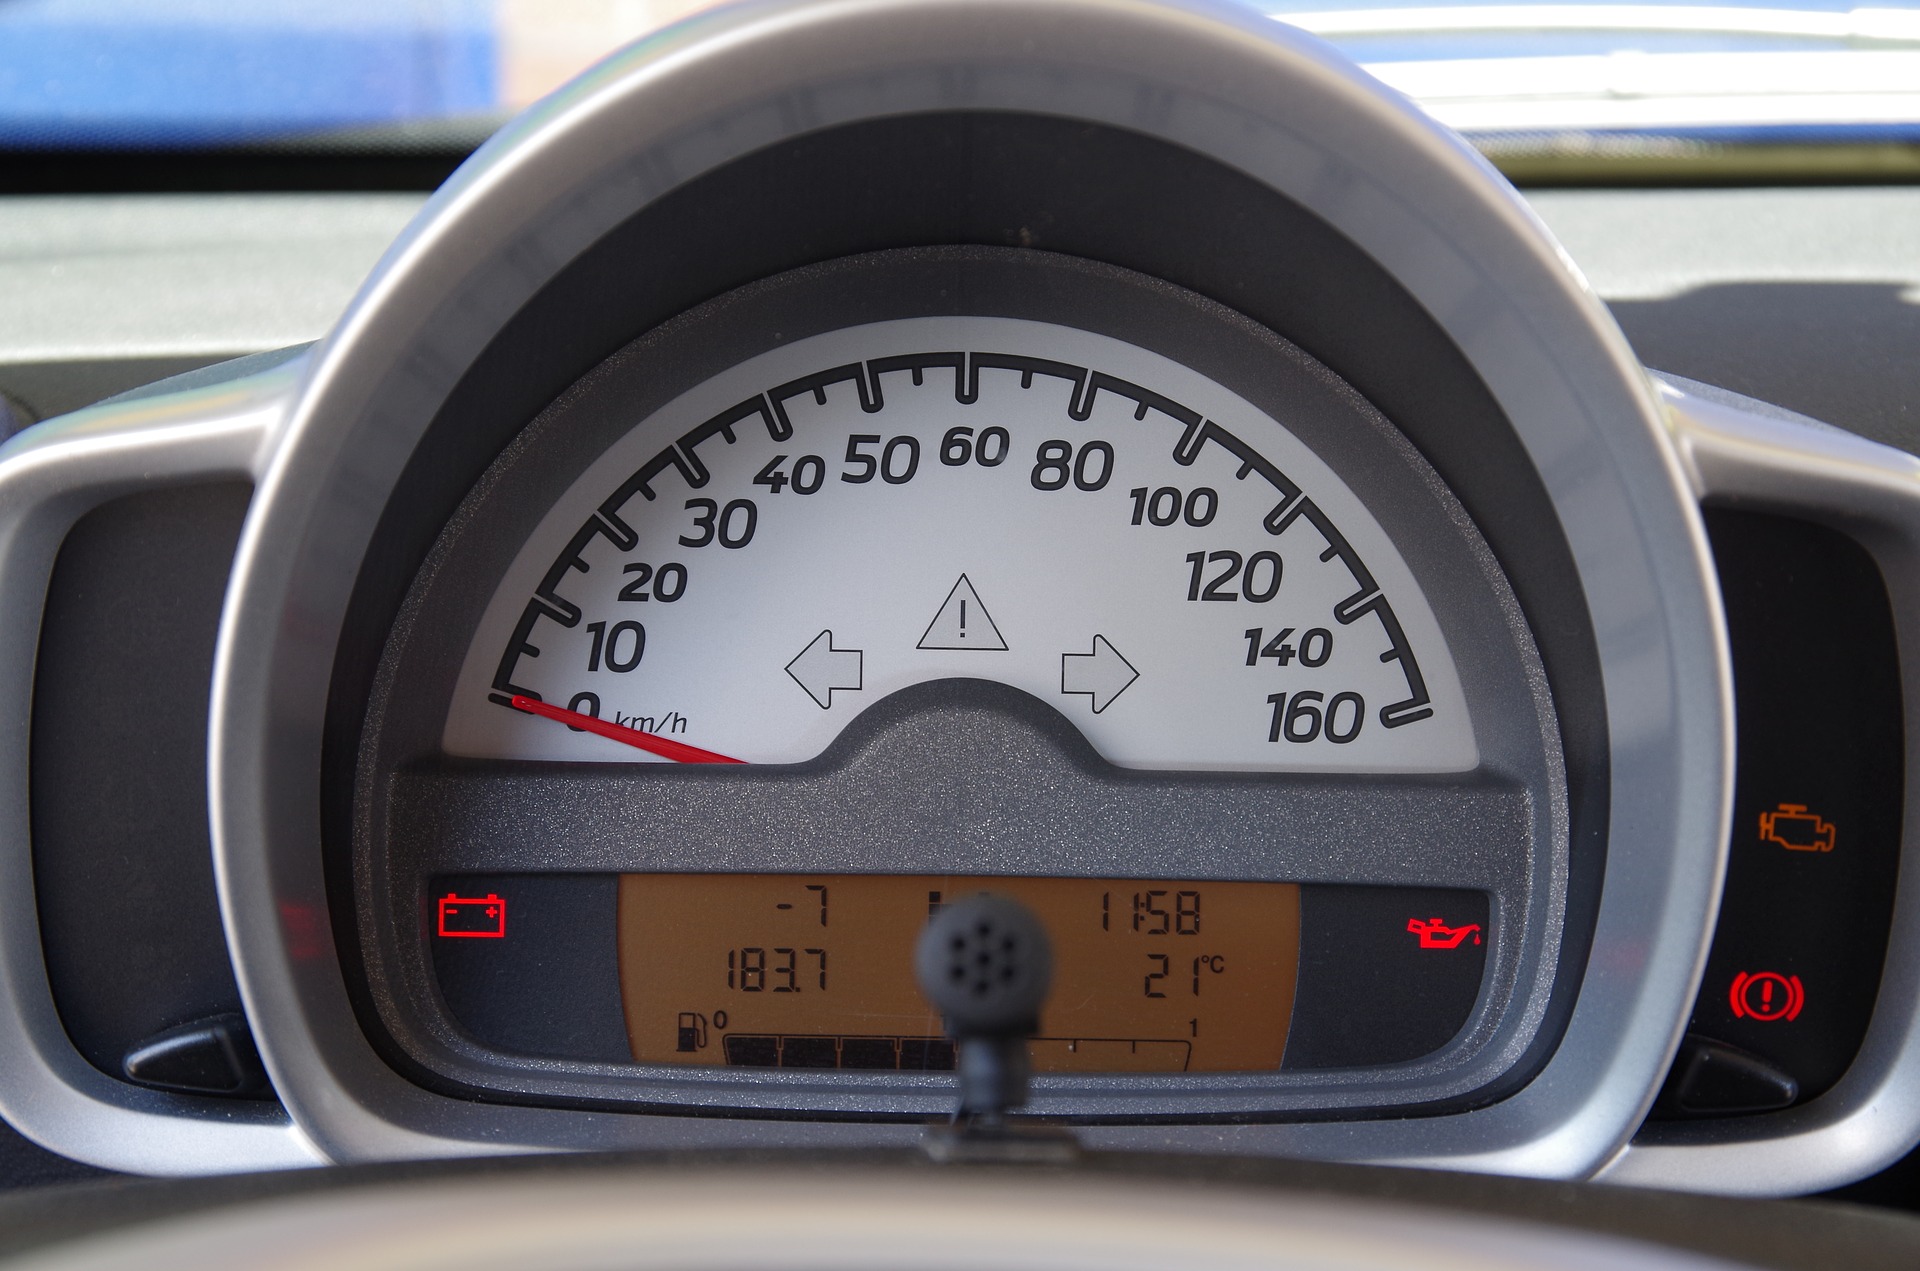 Partially illuminated indicator lights in the instrument panel of a car